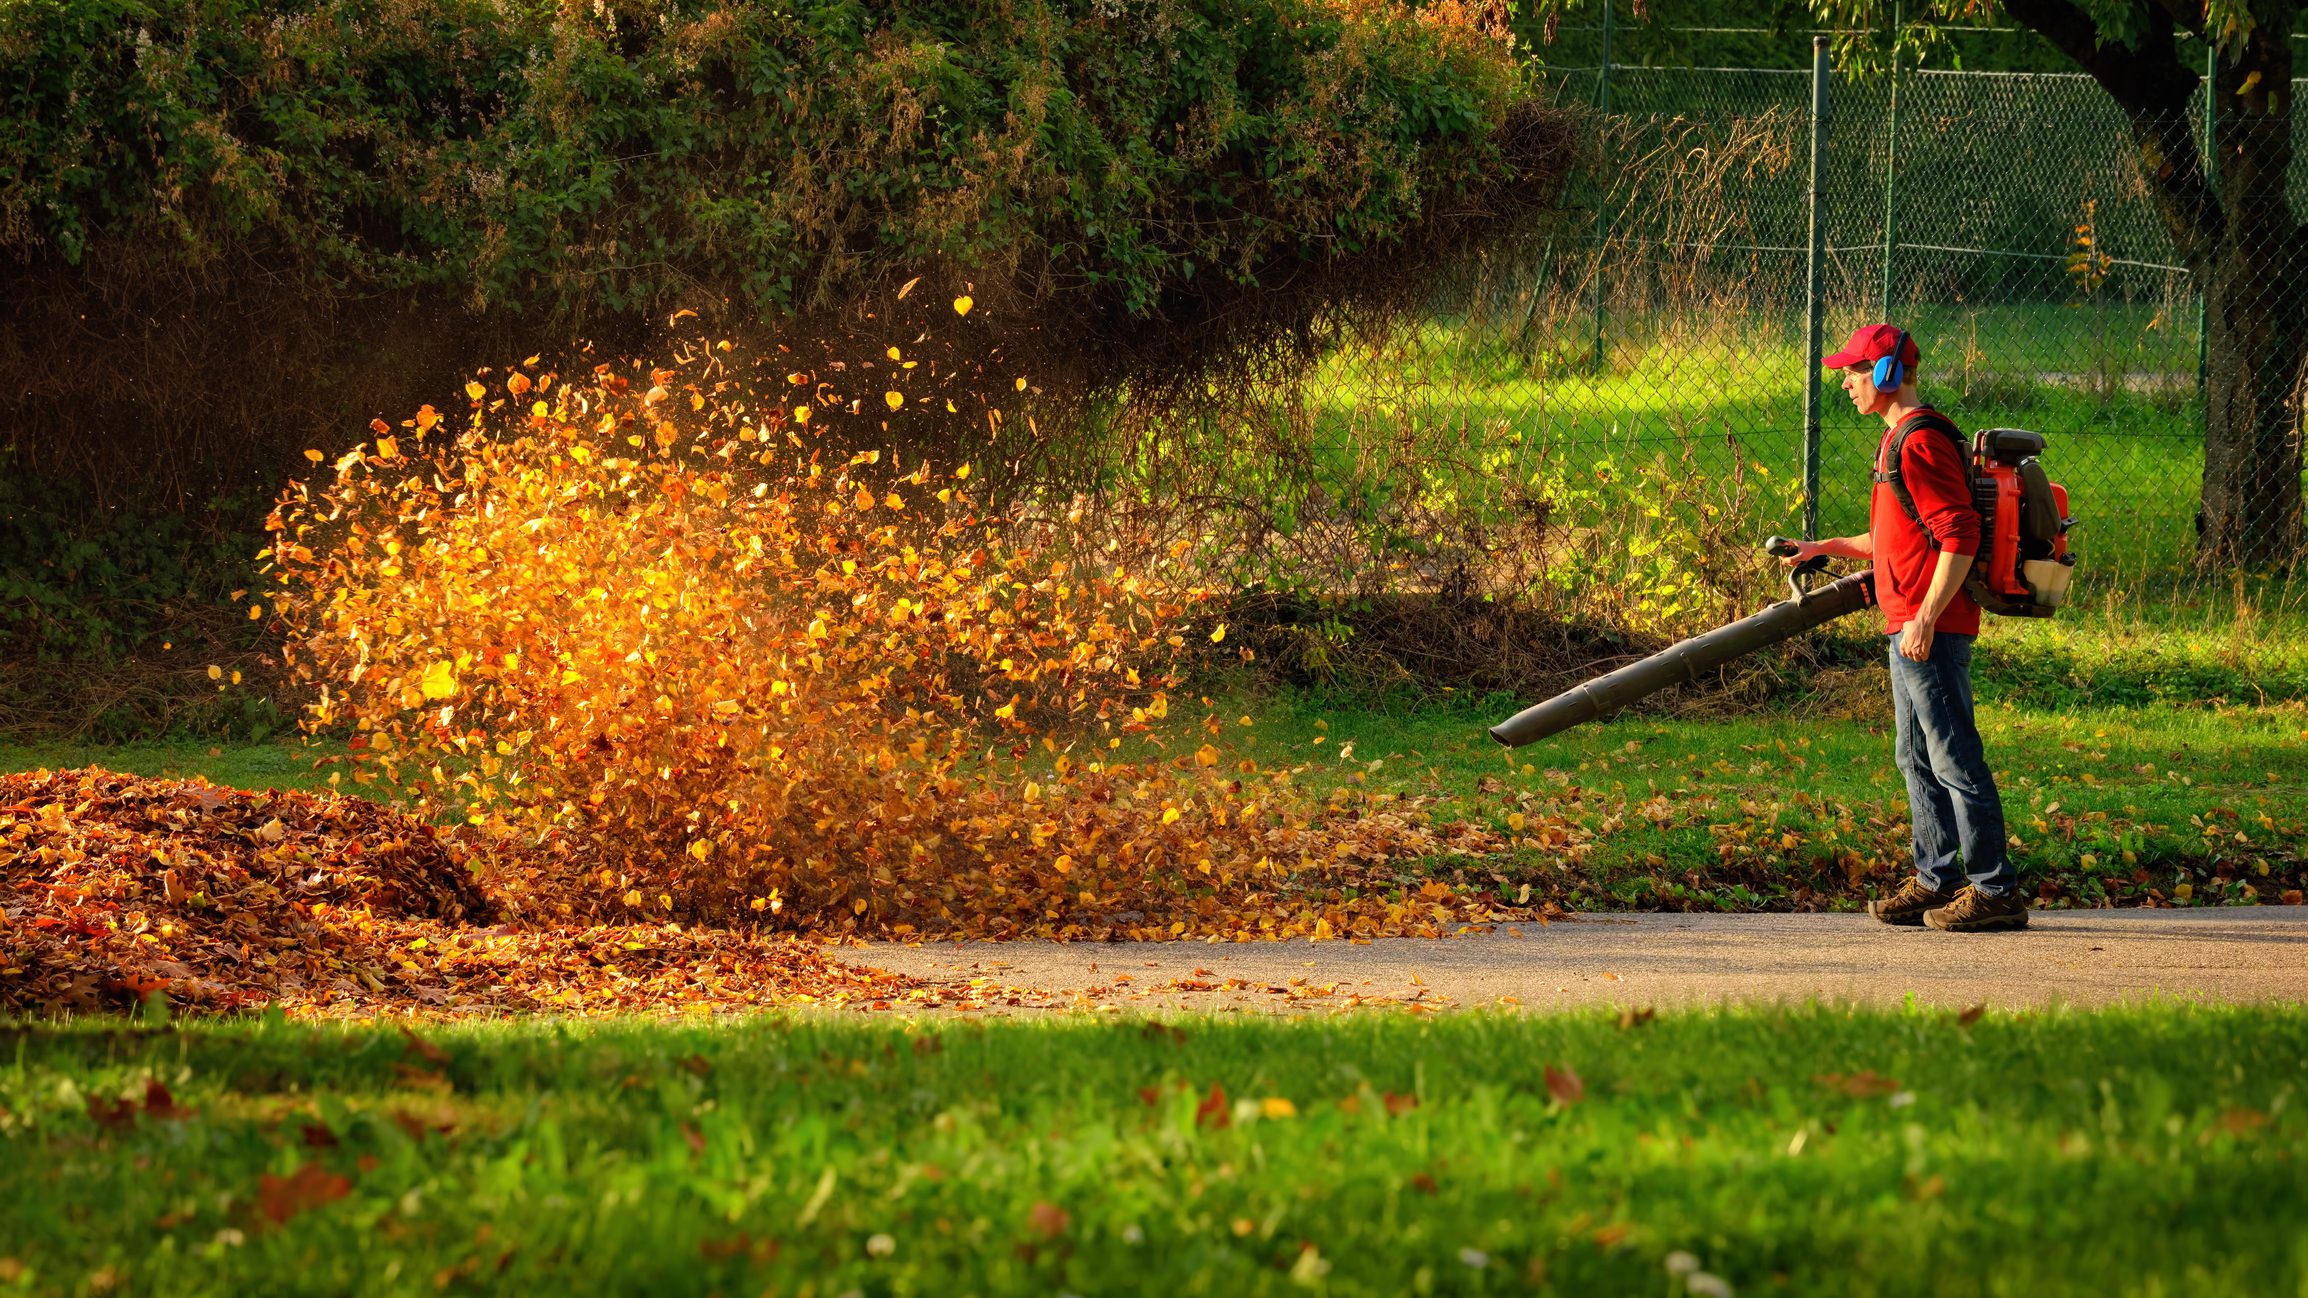 Heavy duty leaf blower in action